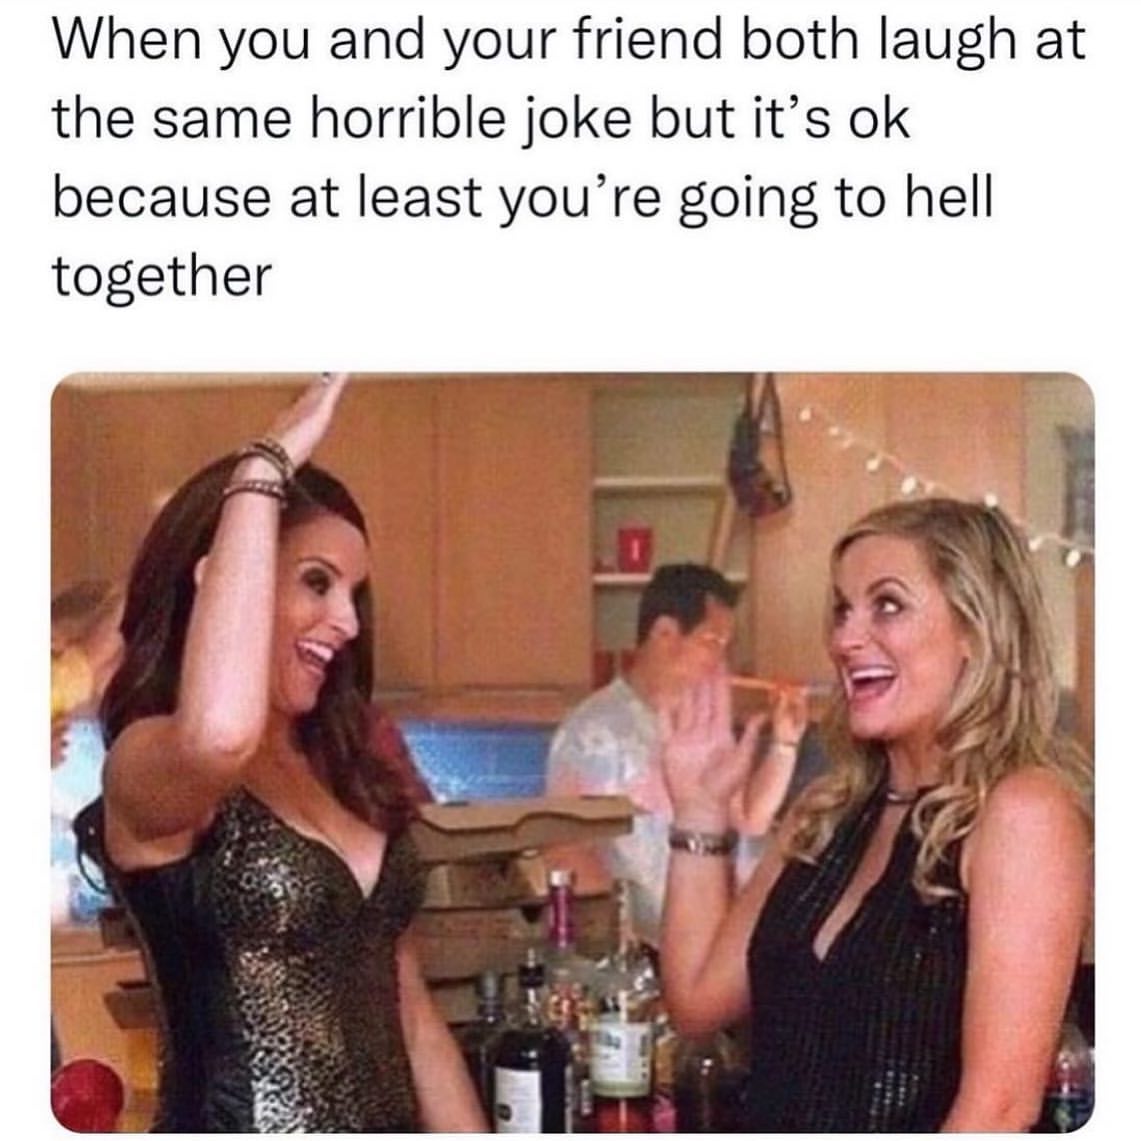 When you and your friend both laugh at the same horrible joke but it's ok because at least you're going to hell together.